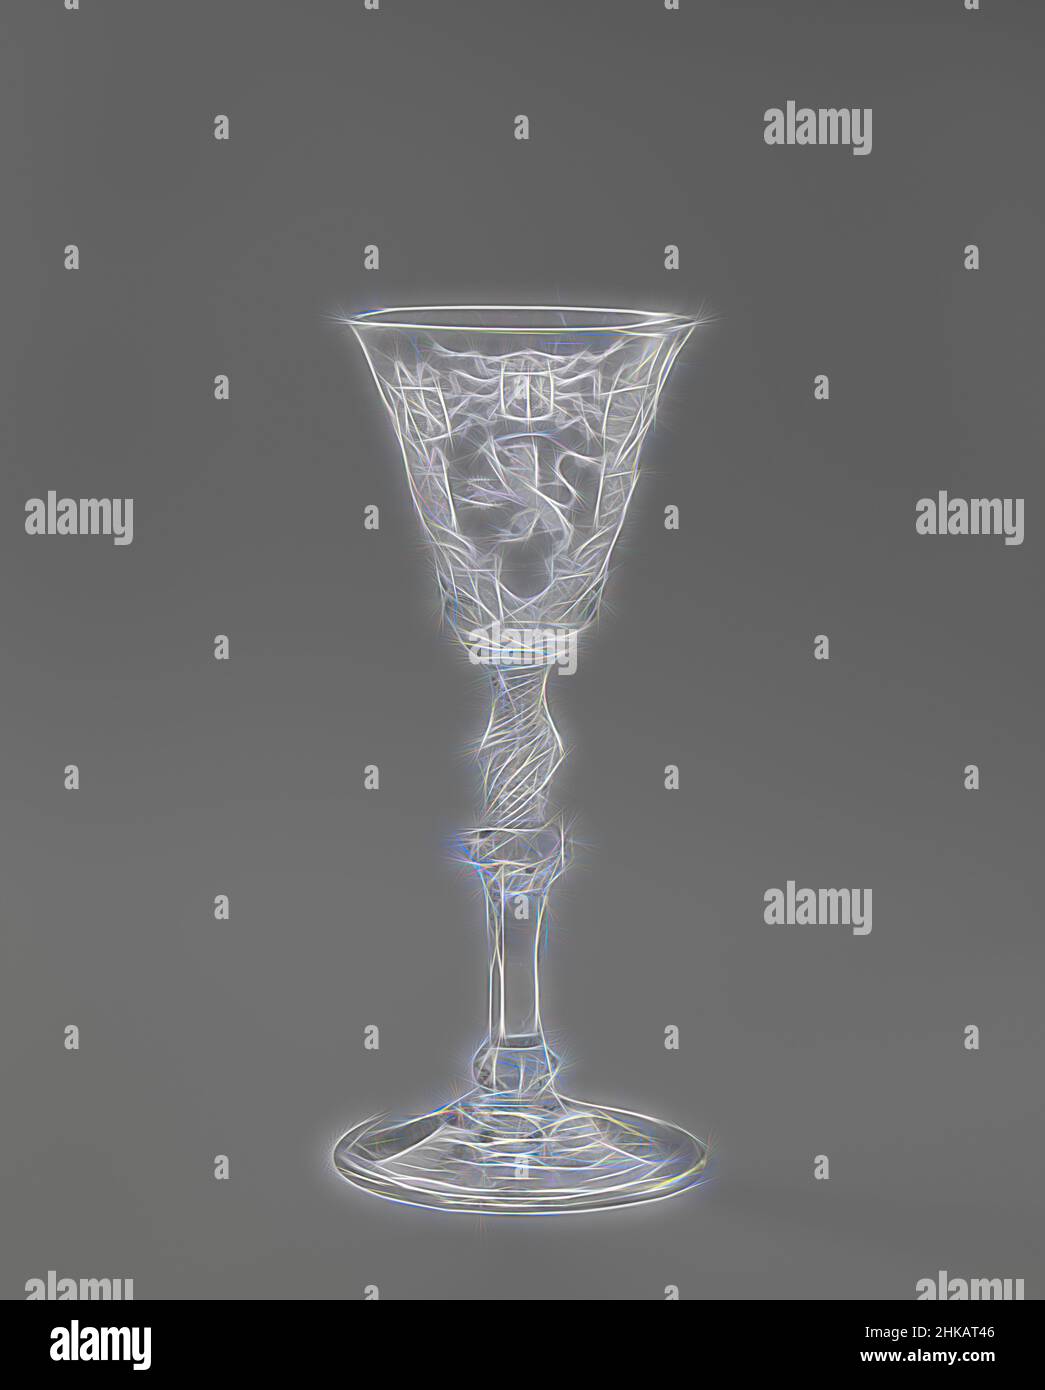 Inspired by Chalice glass with the arms of the States General and the Seven Provinces, Vaulted foot. Baluster stem with knots, the middle one with a double row of bubbles. Upper part of stem with bubbles wound in spirals.  On the conical chalice the arms of the States General surrounded by the arms, Reimagined by Artotop. Classic art reinvented with a modern twist. Design of warm cheerful glowing of brightness and light ray radiance. Photography inspired by surrealism and futurism, embracing dynamic energy of modern technology, movement, speed and revolutionize culture Stock Photo